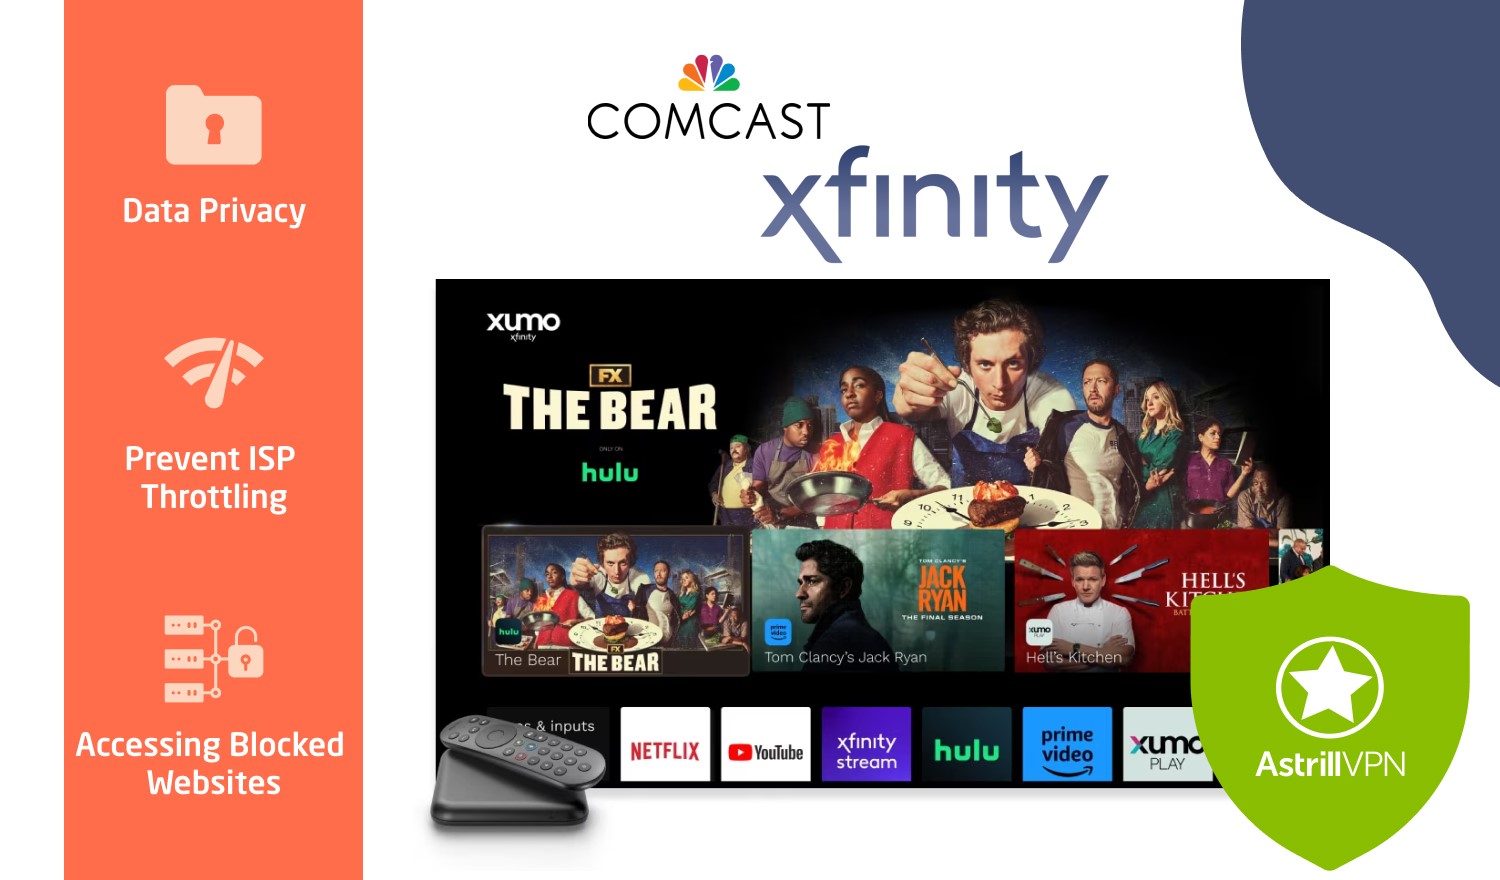 Why Do You Need A VPN For Comcast Xfinity